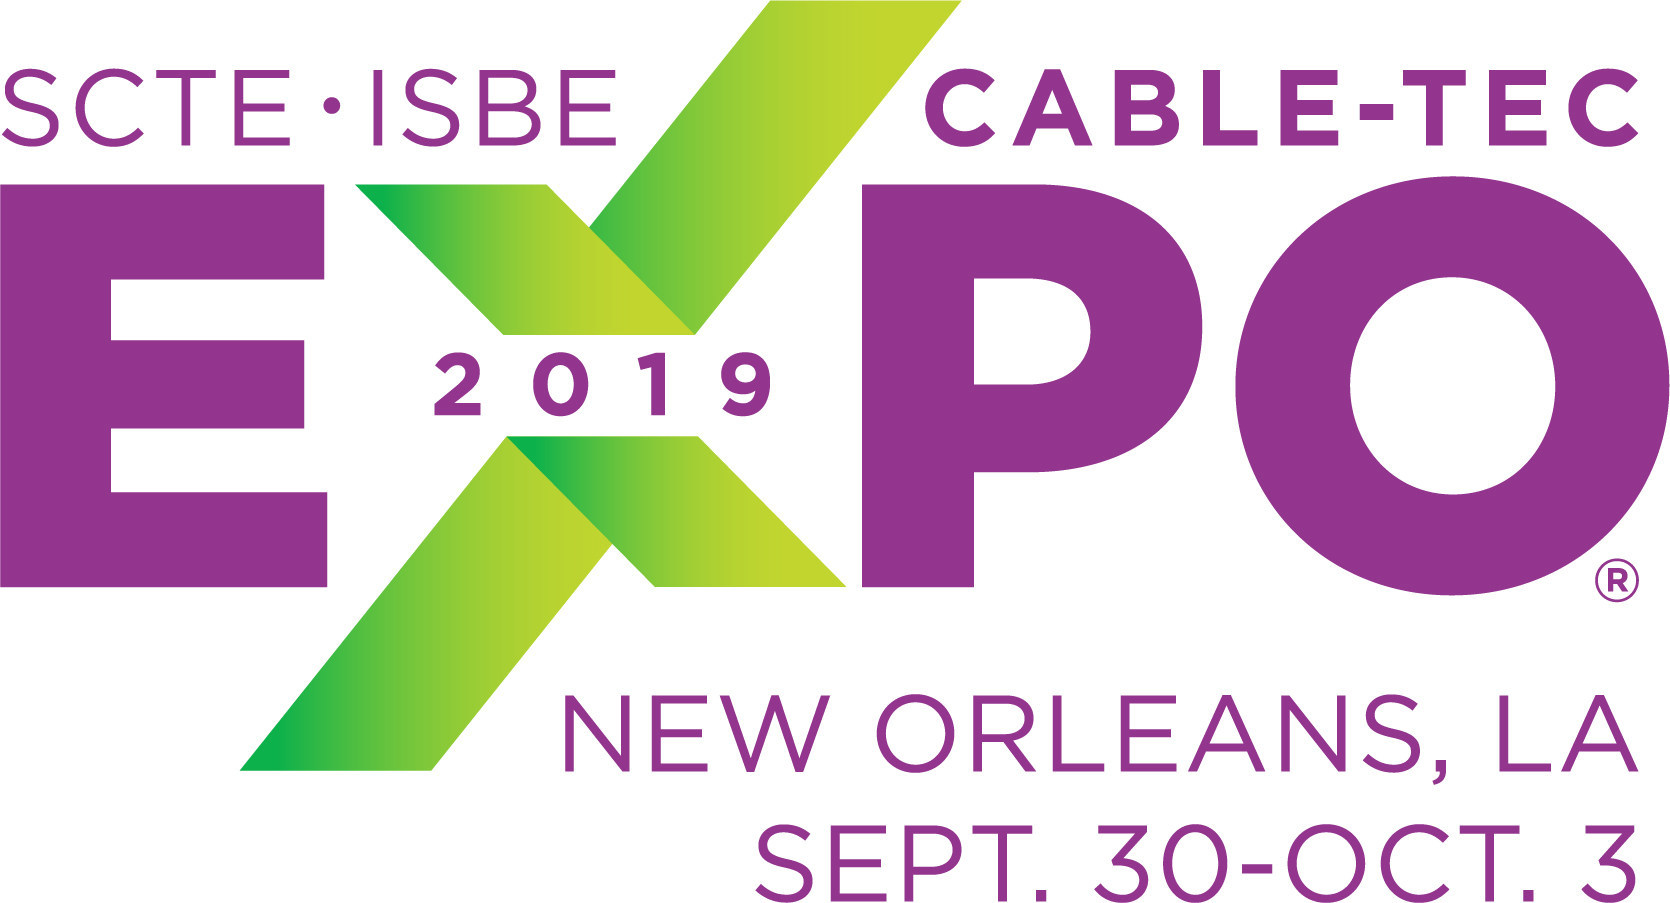 International Program Continues Growth At SCTE•ISBE CableTec Expo®